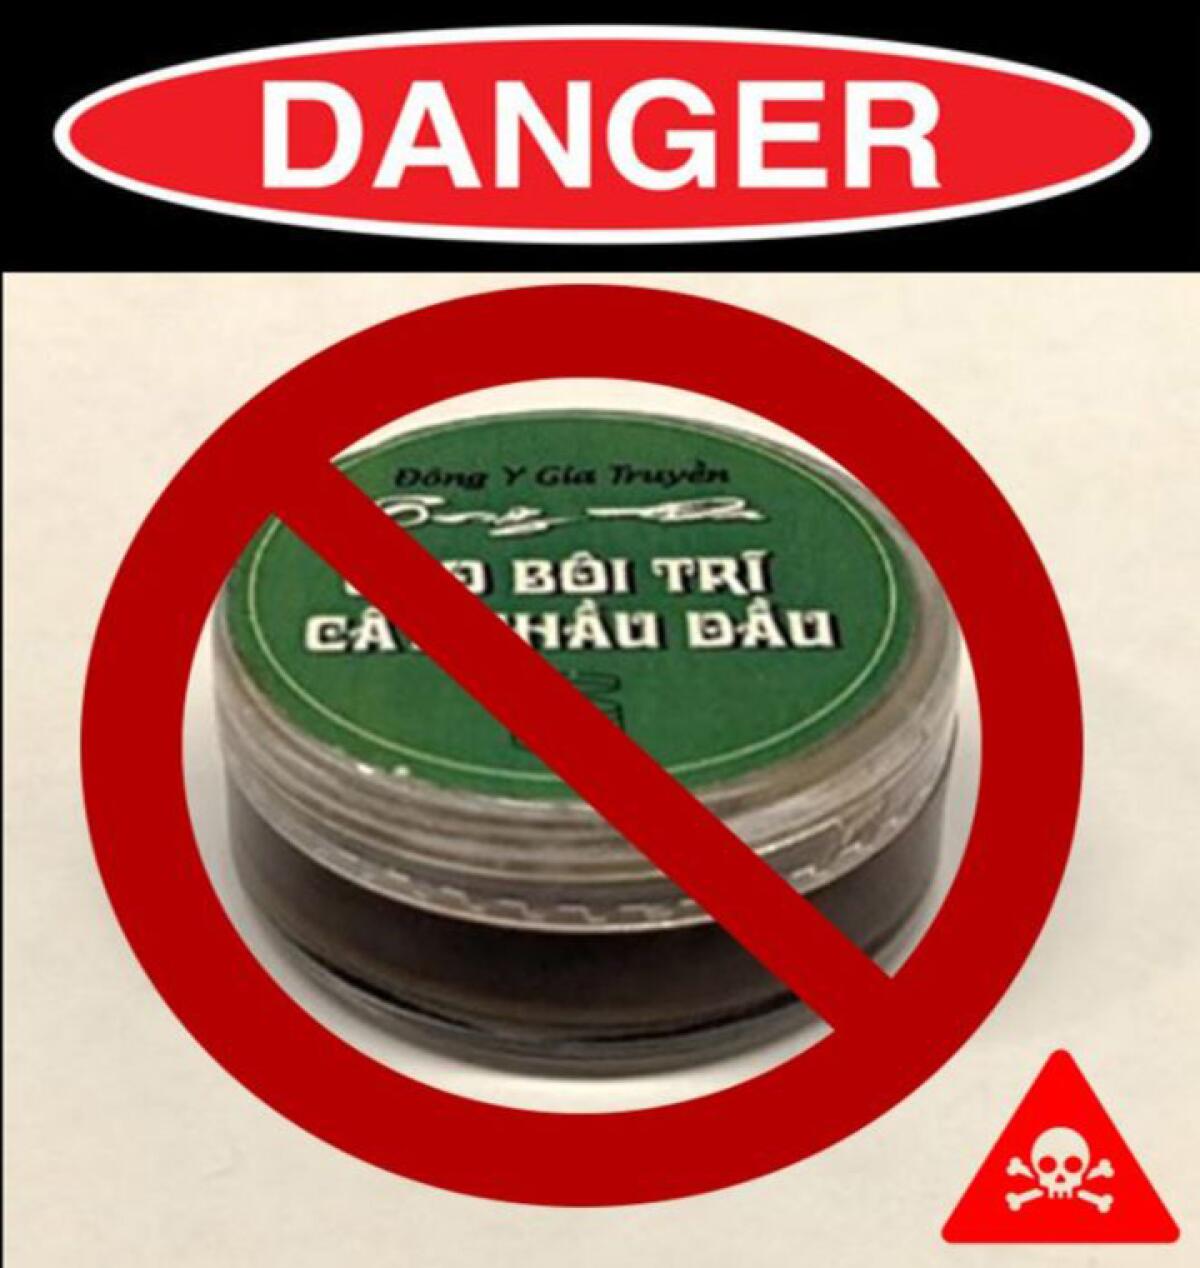 OC Health Care Agency urges users of the Vietnamese hemorrhoid ointment to immediately stop using the ointment.